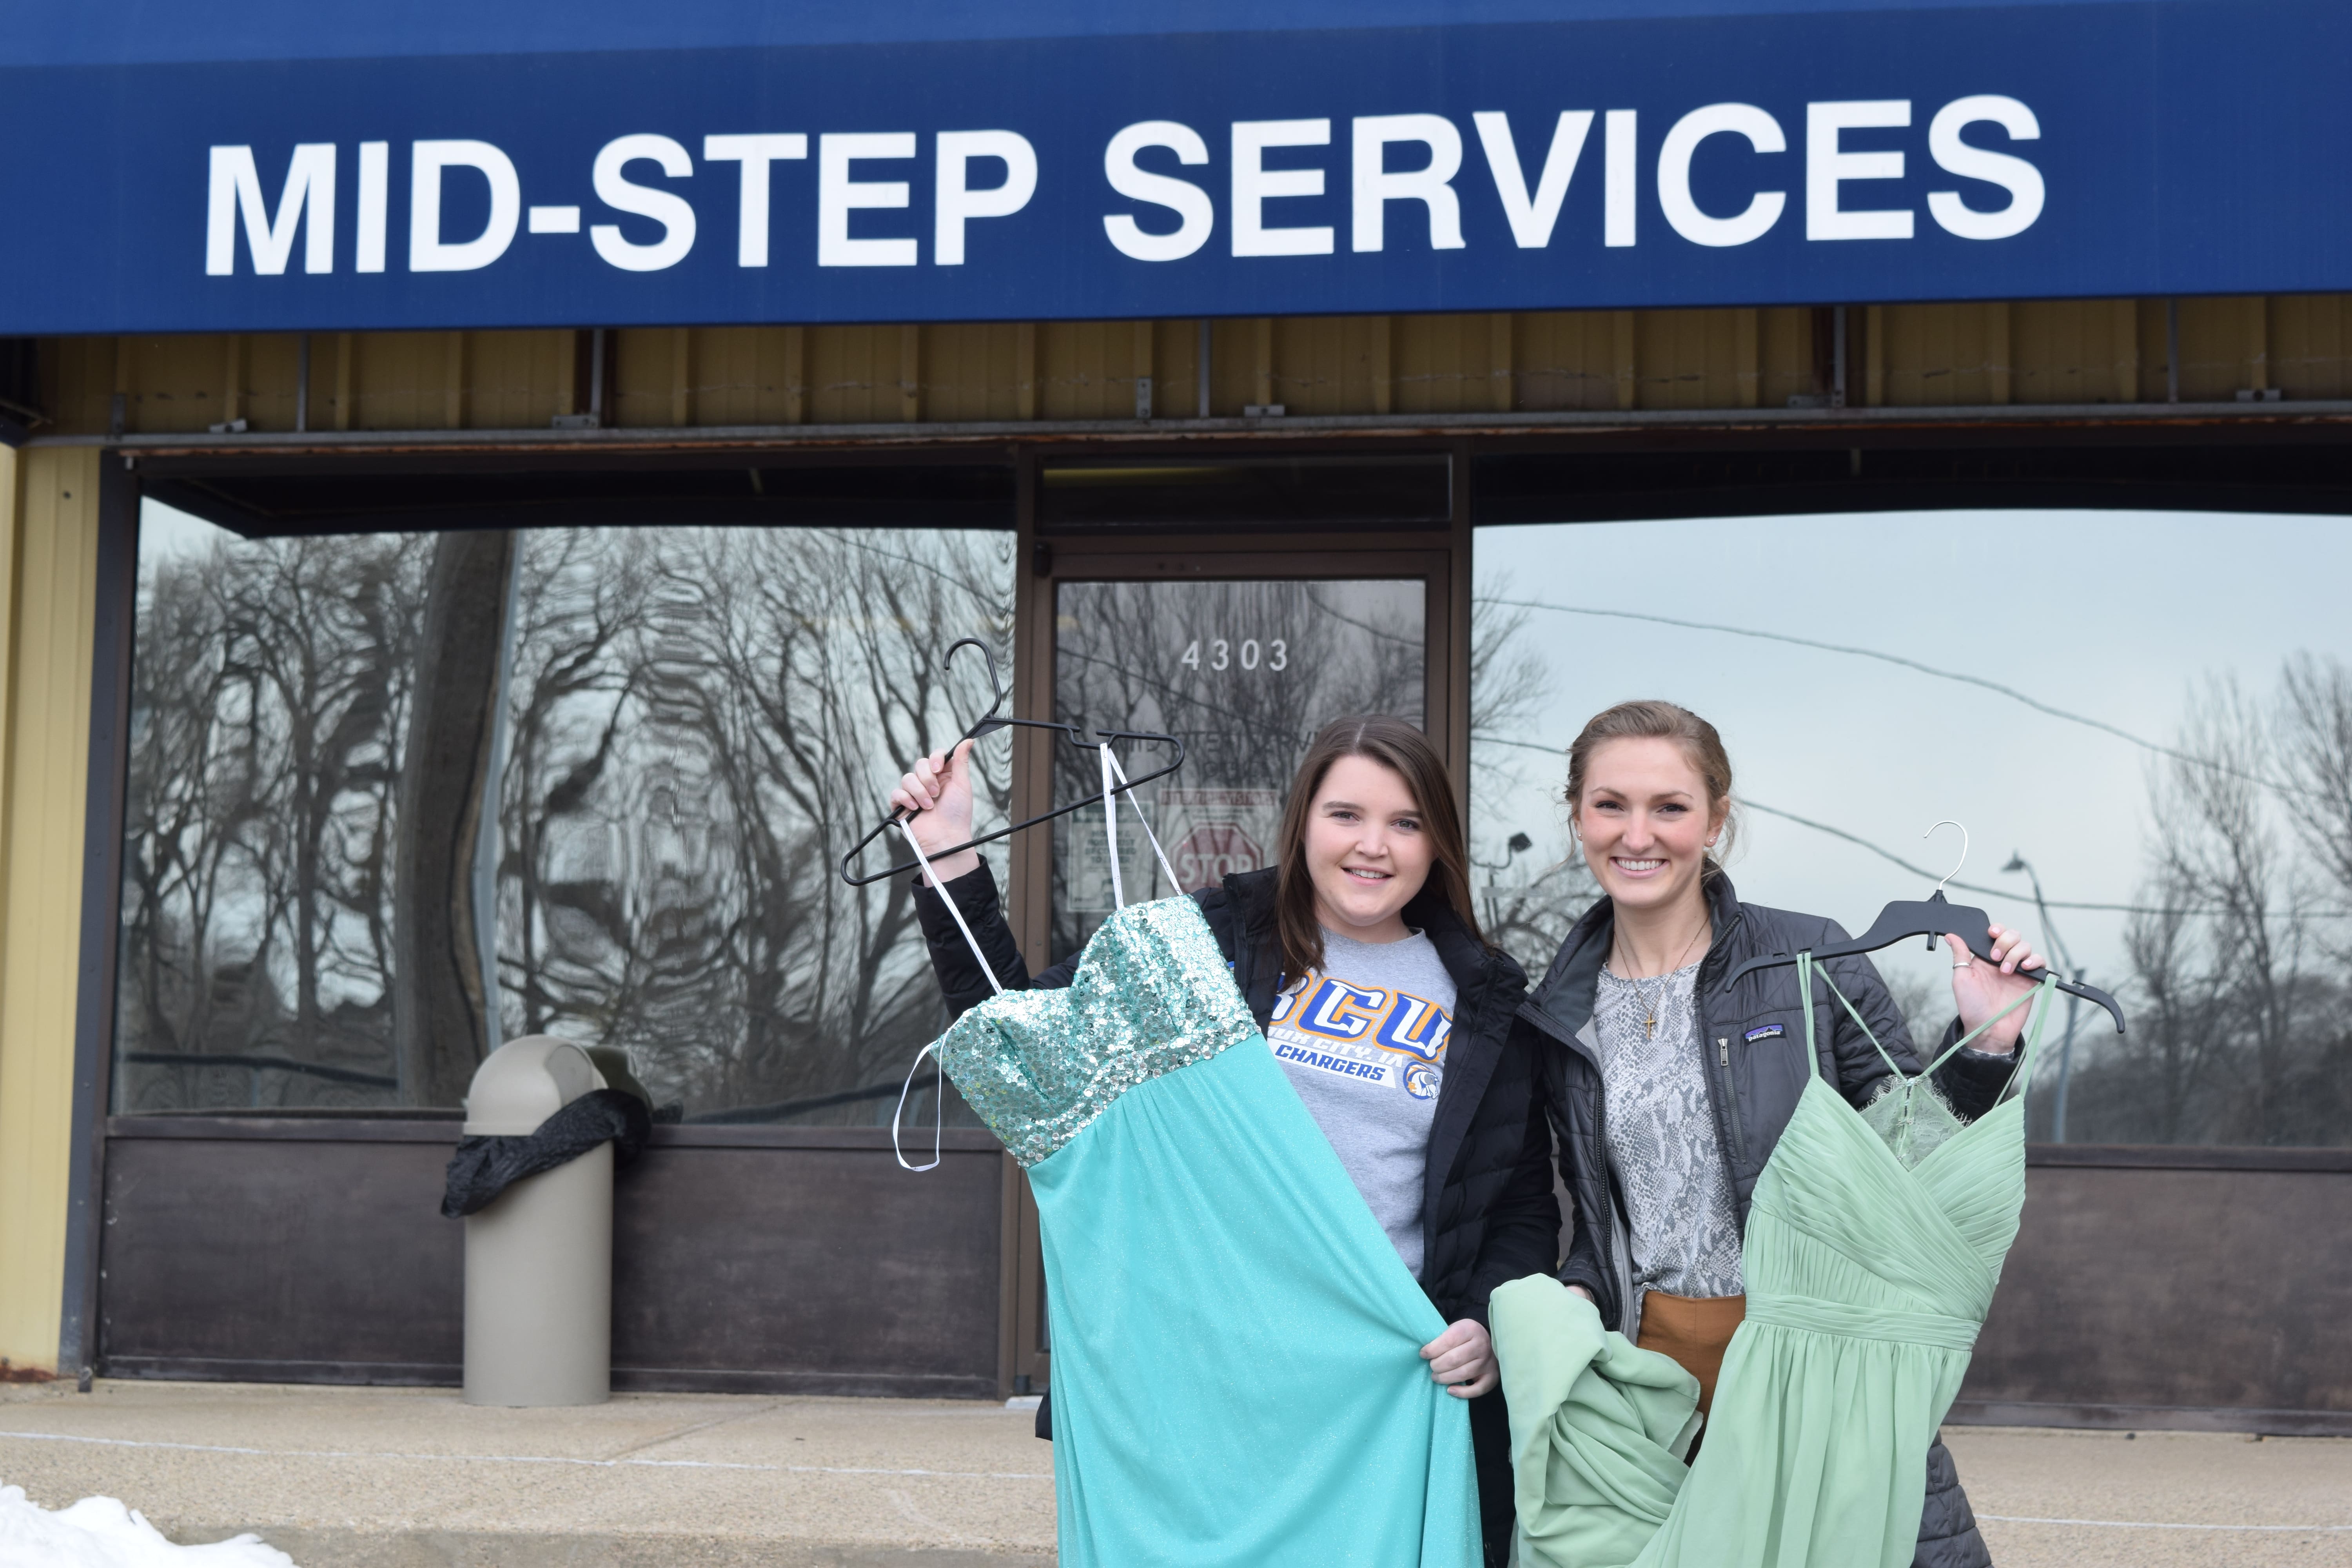 Prom dress drive for Mid-Step Services